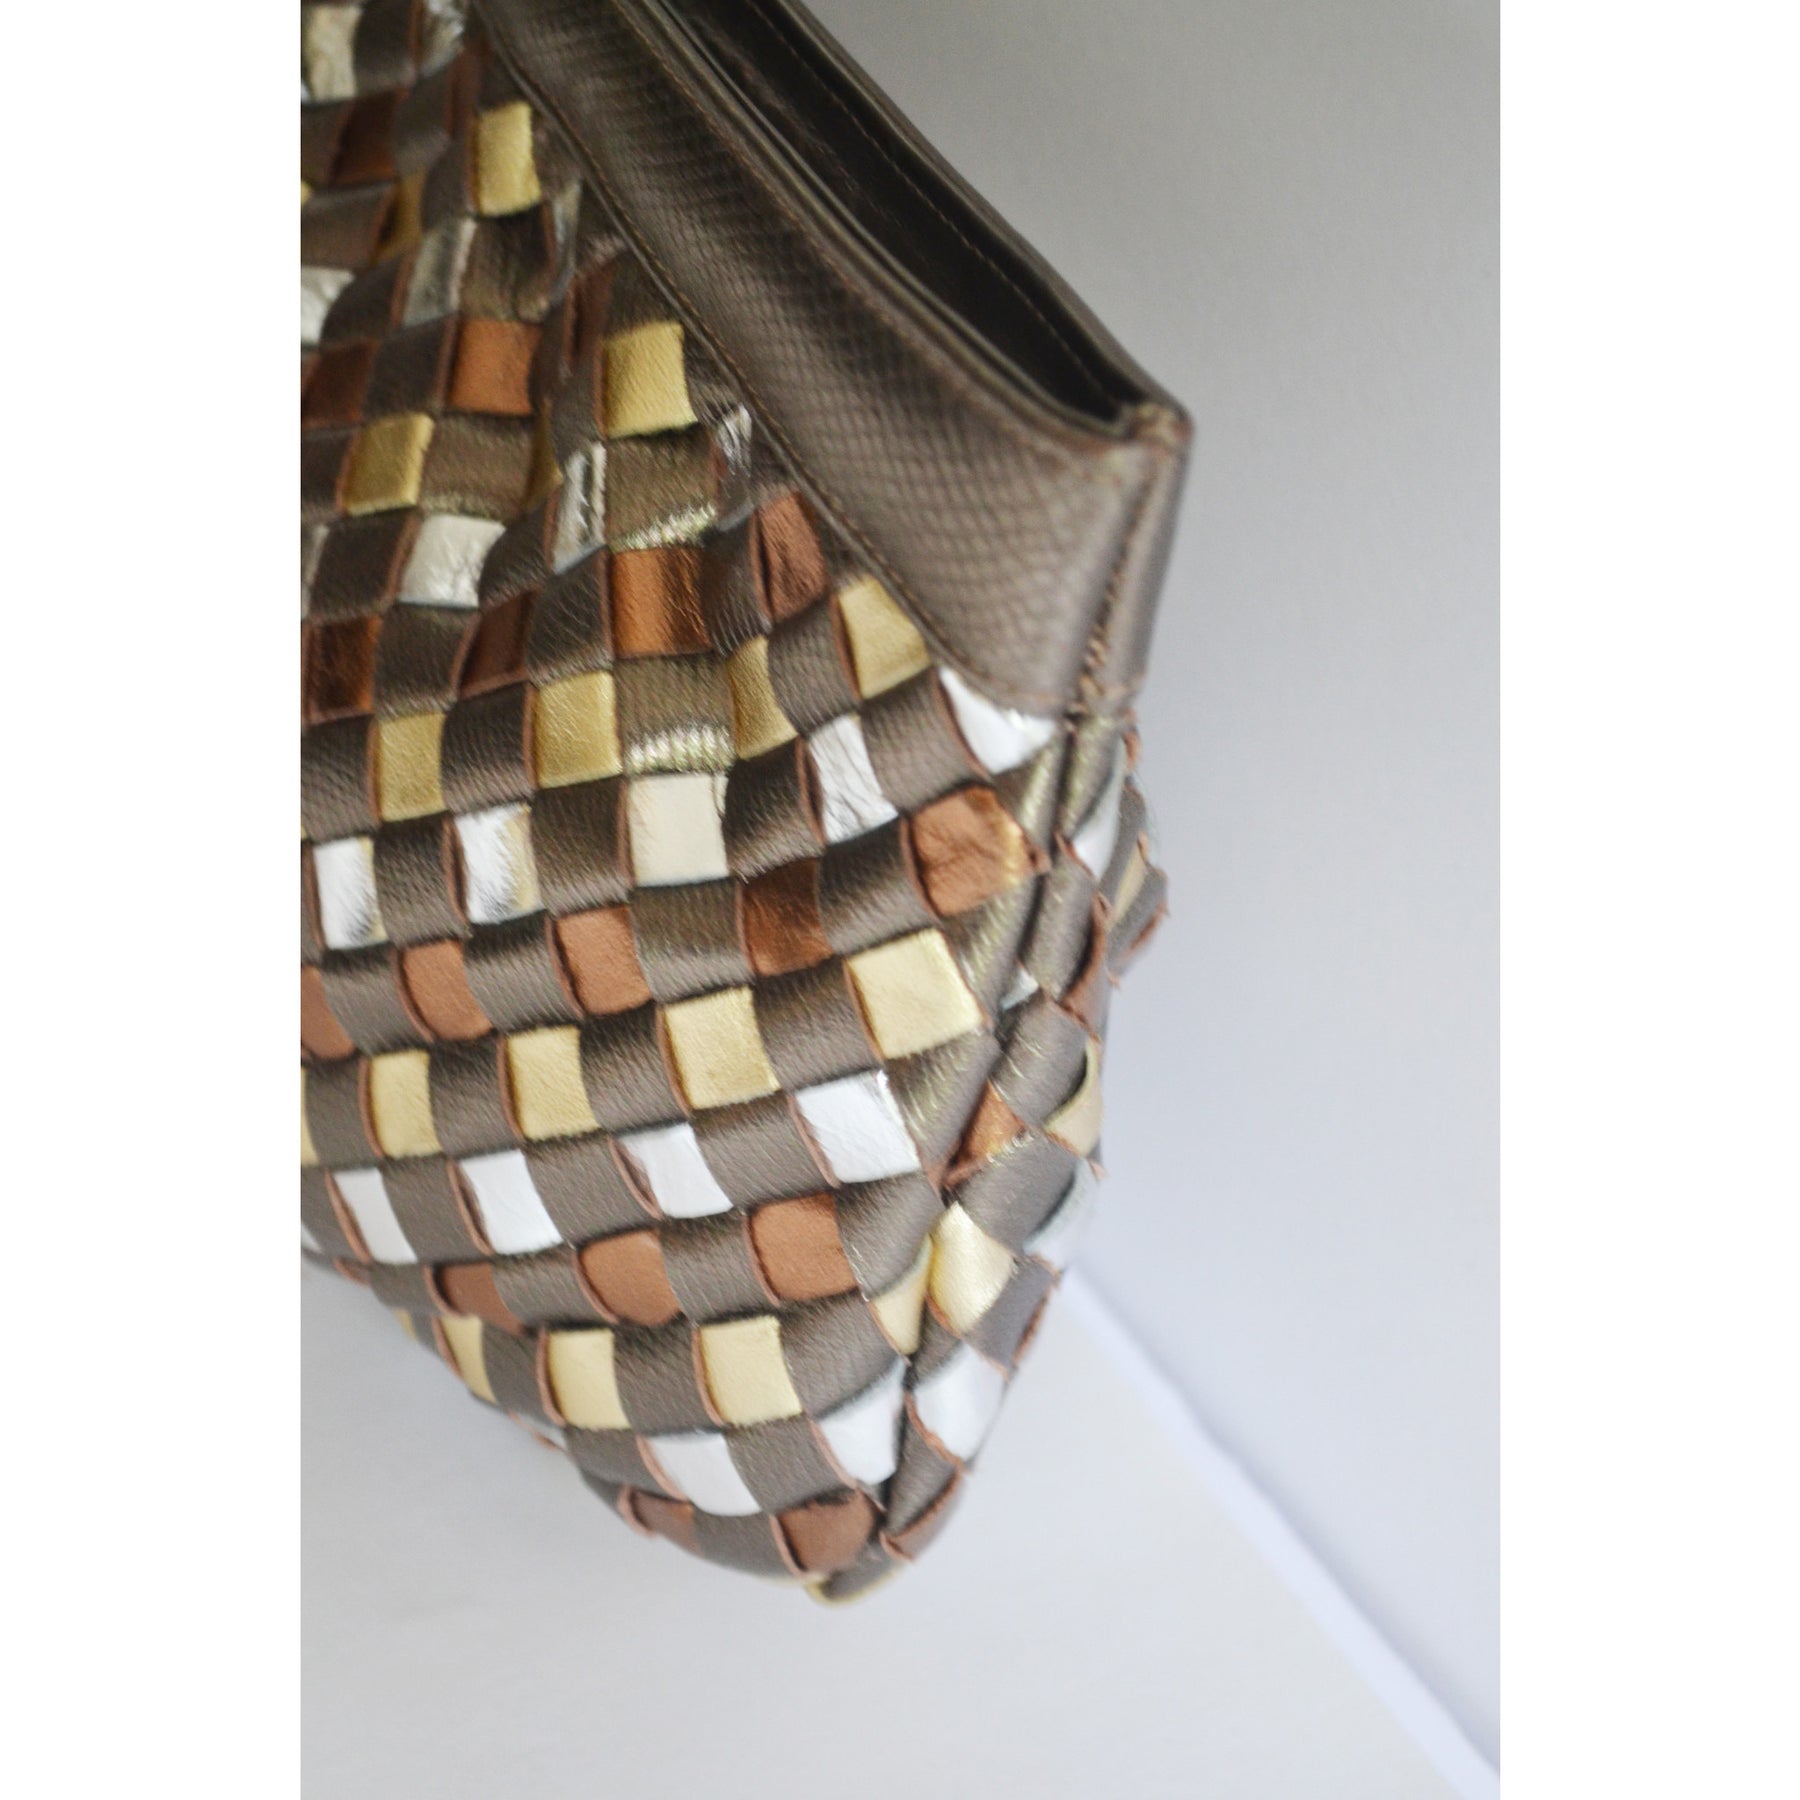 Vintage Metallic Woven Leather Clutch Purse By Sharif – Quirky Finds